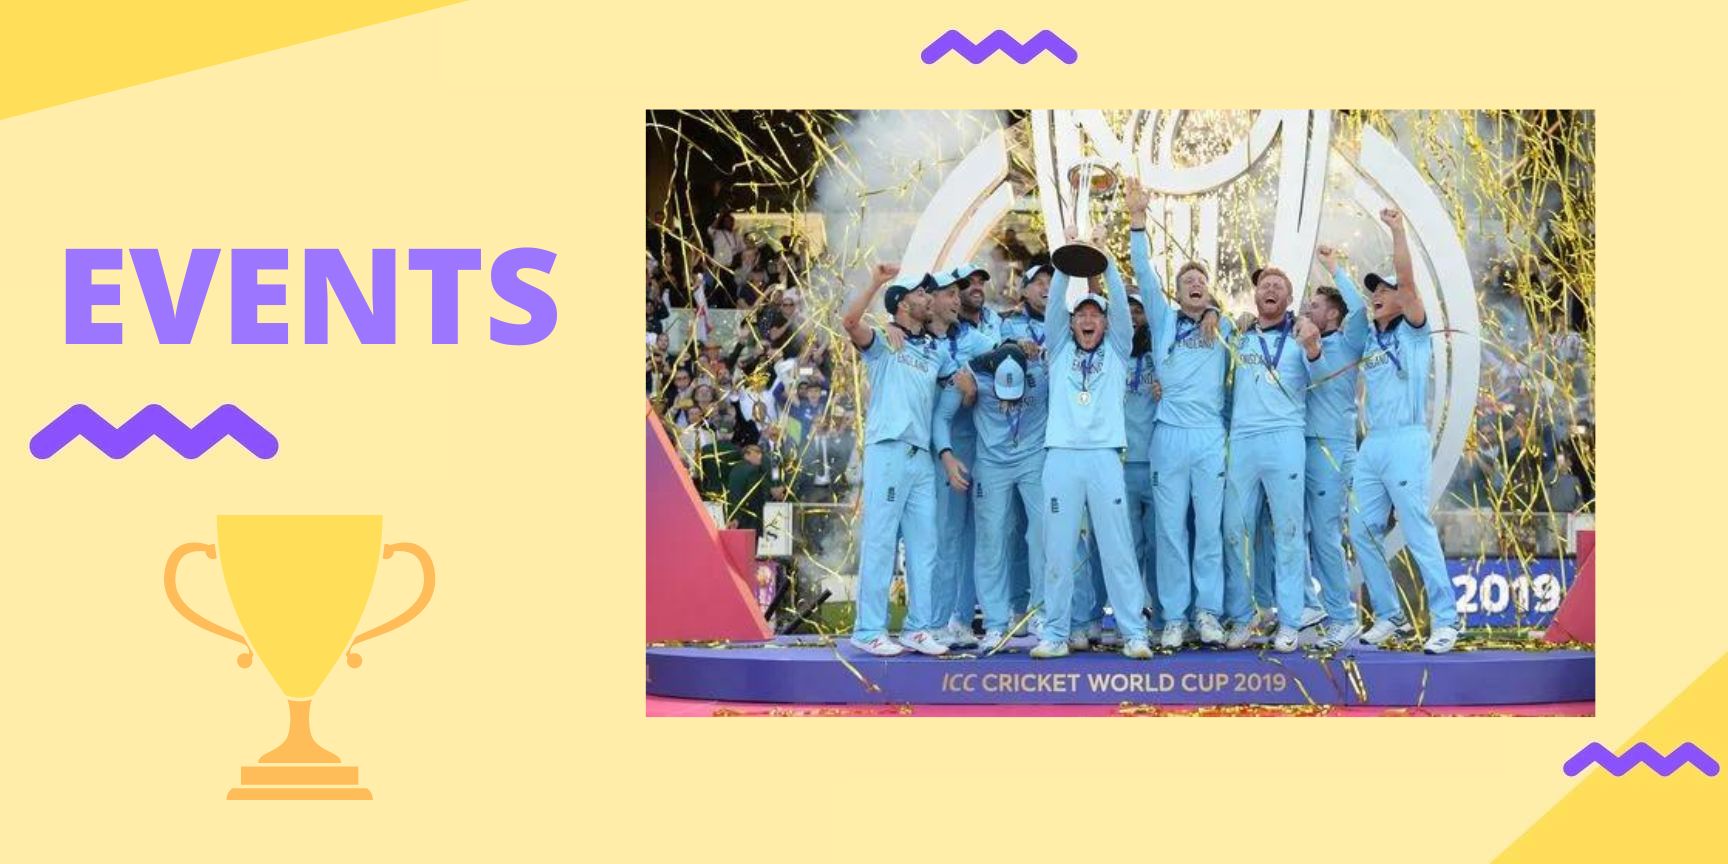 A guide to International cricket tournaments and events